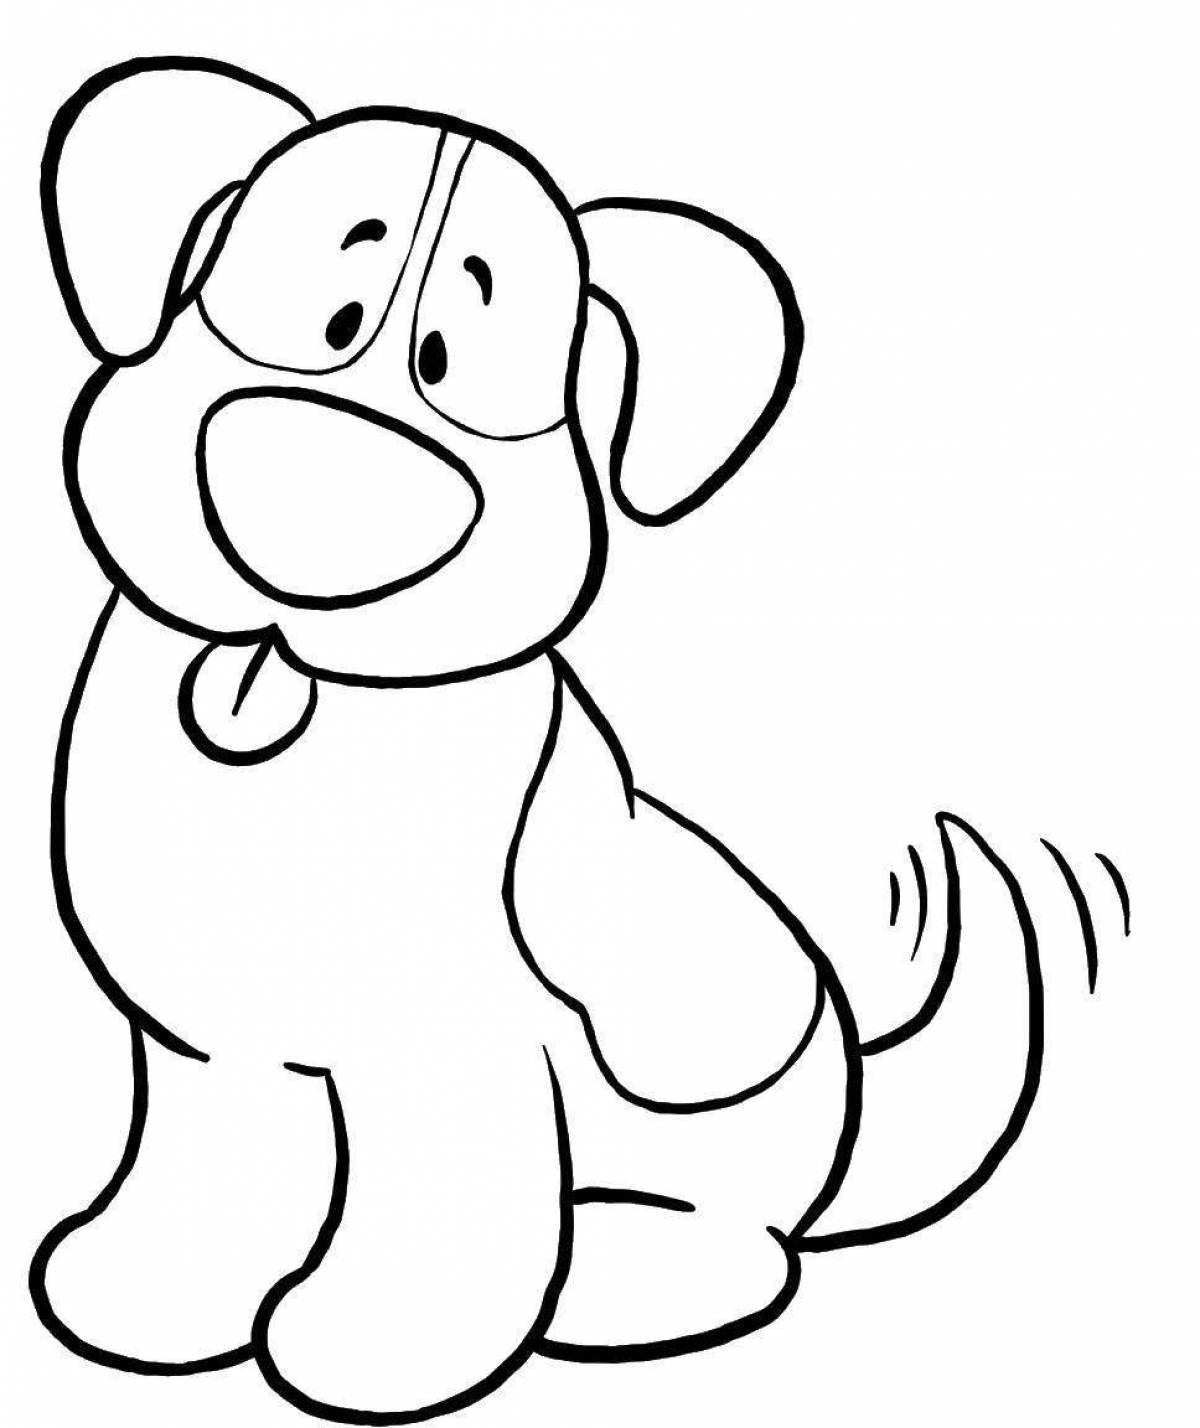 Dog friendly coloring book